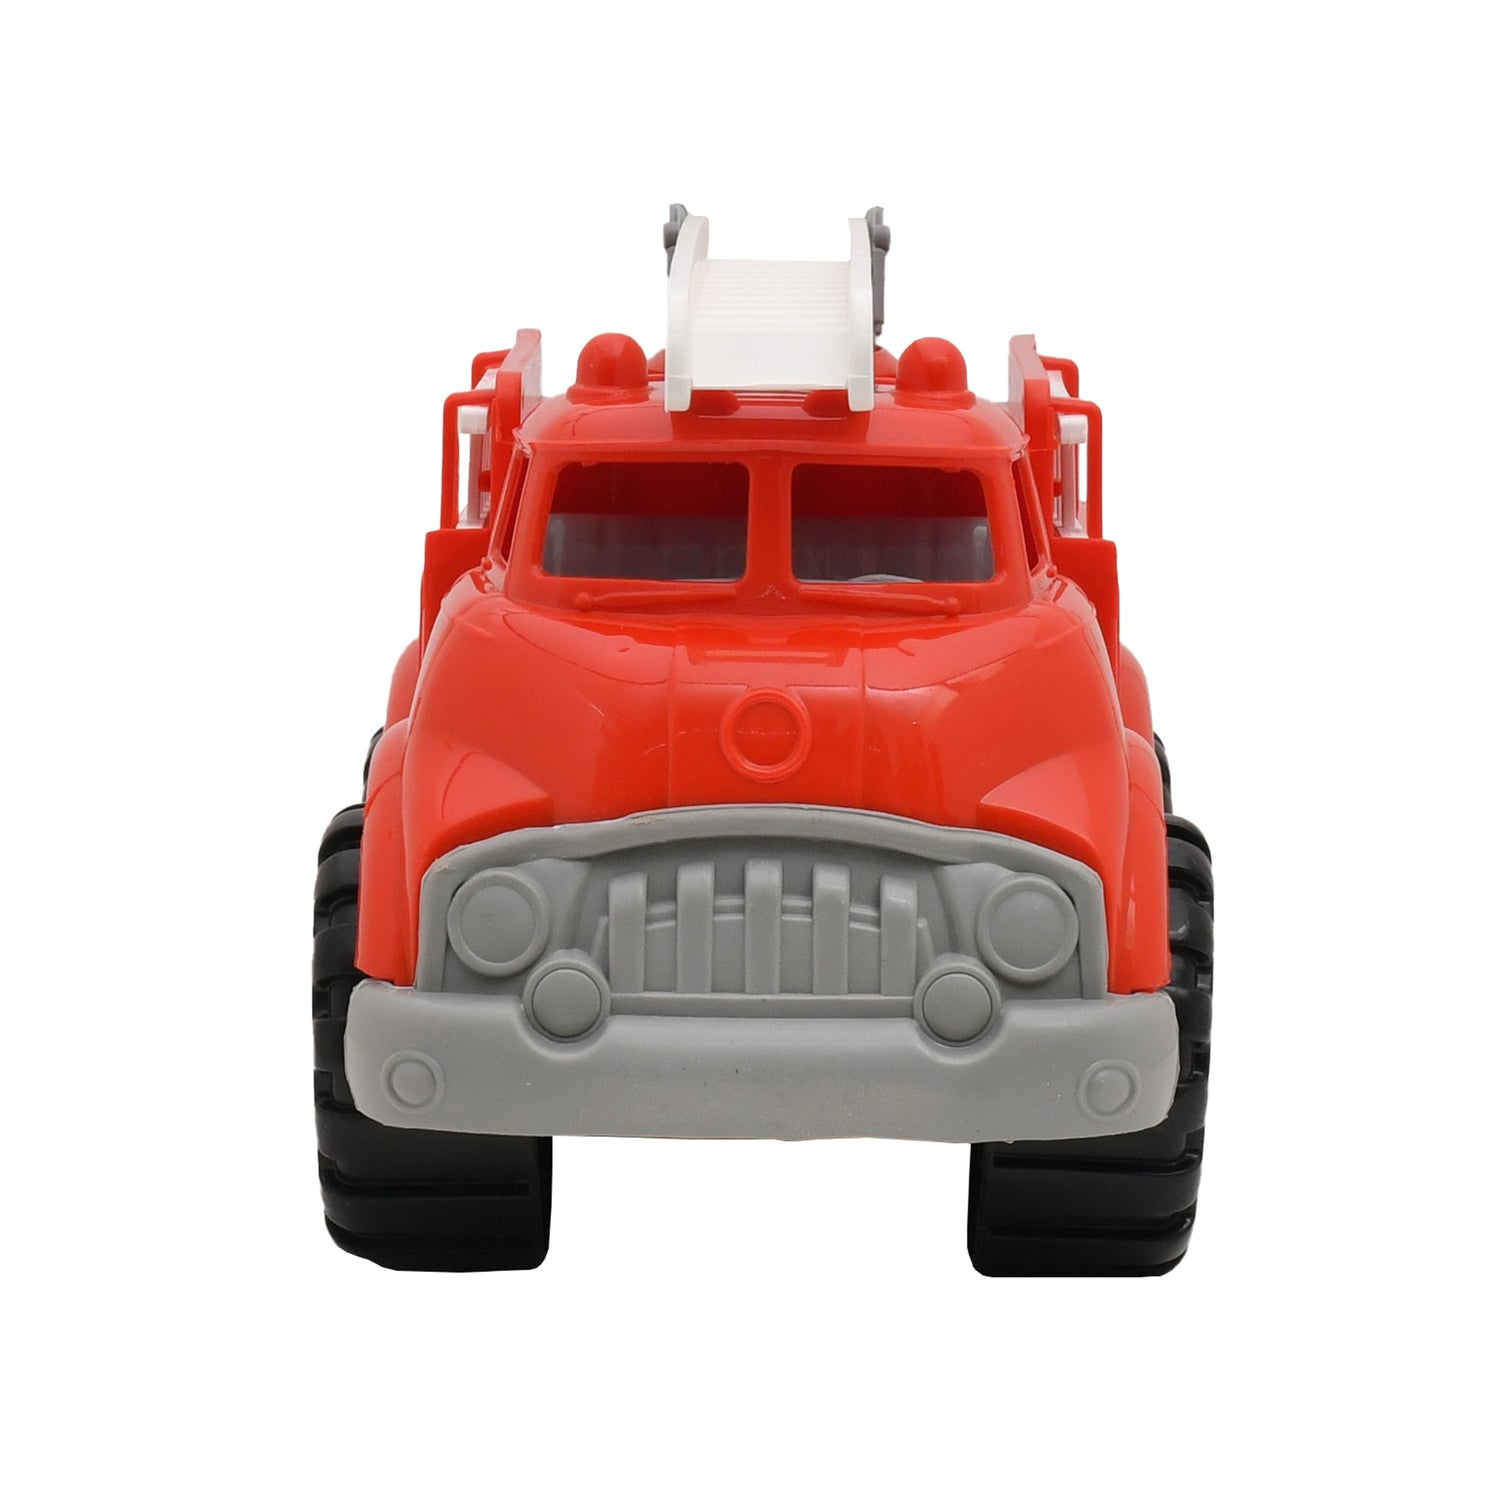 Rescue Fire Truck Toy - Red Mumuso